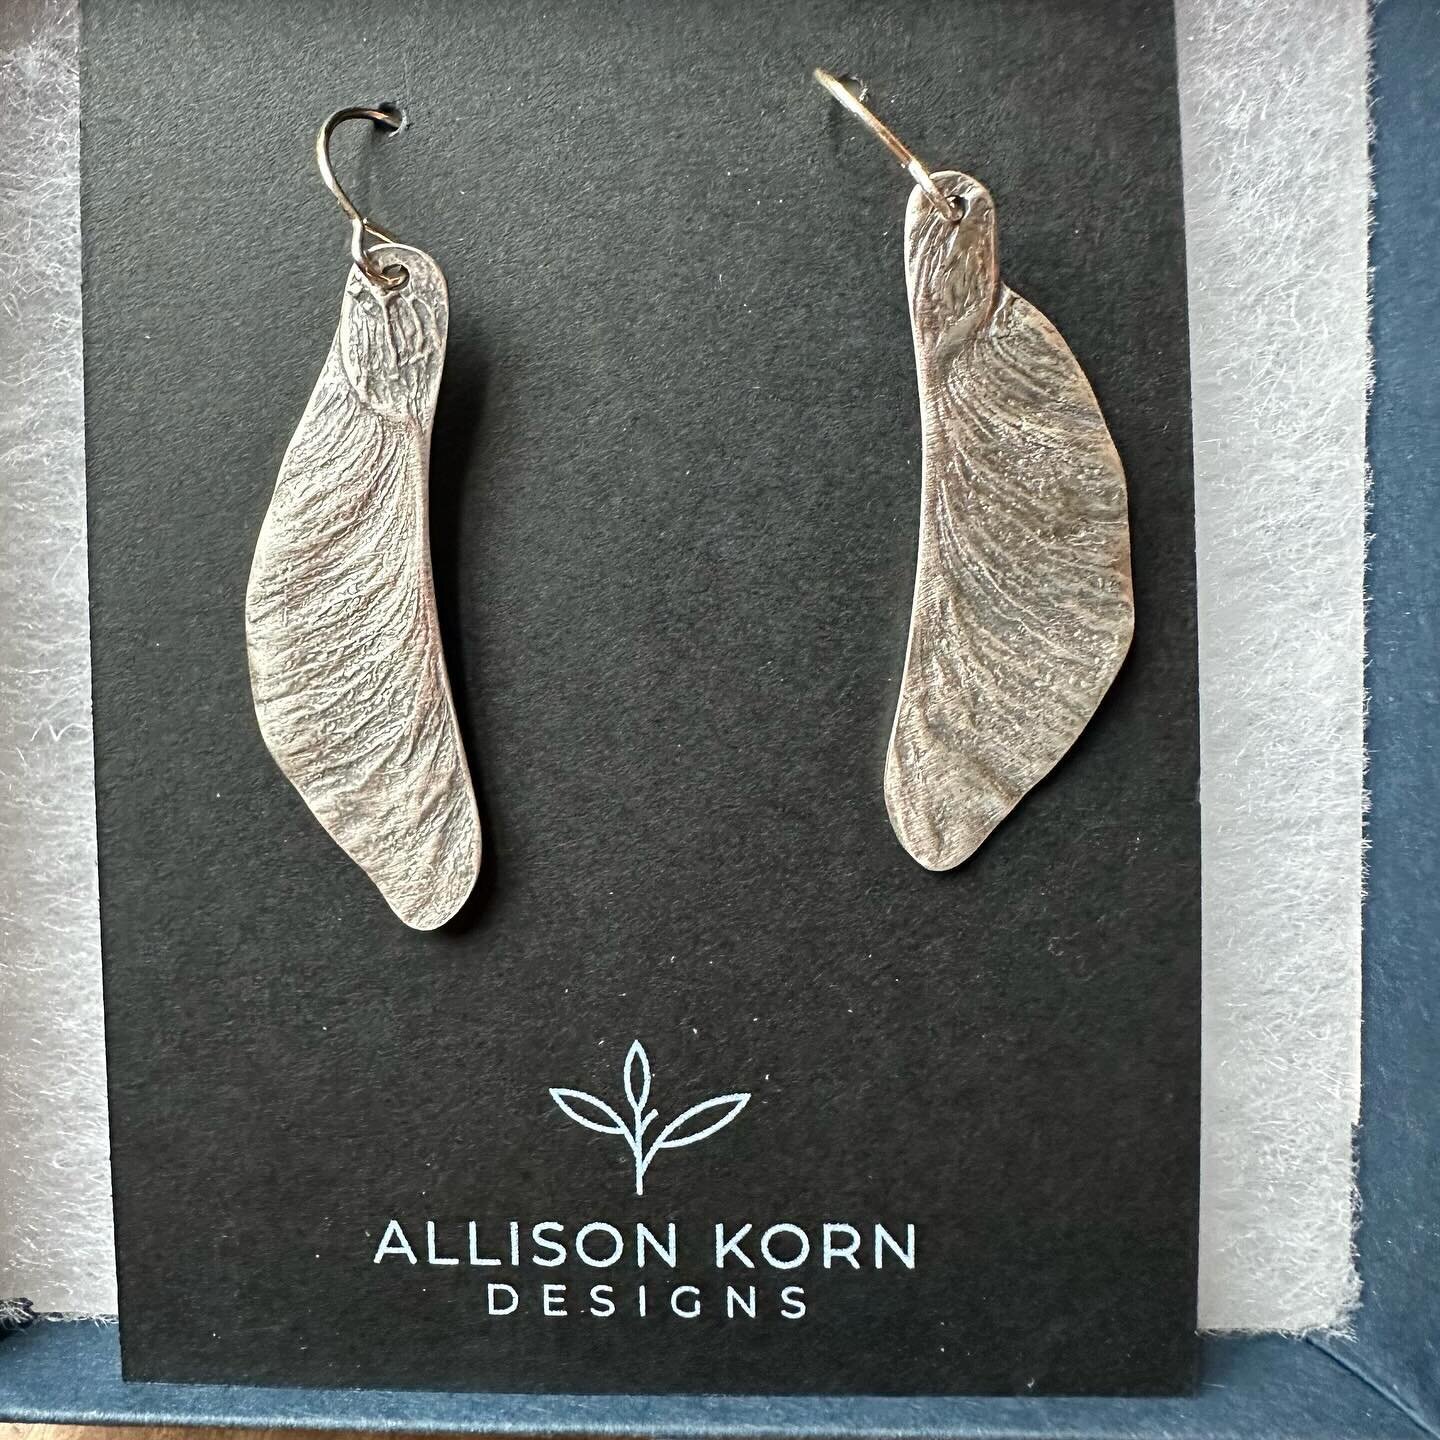 On one of my plane trips last year I lost one of my @allisonkorndesigns Samara earrings. I wore them thinking that would be safer than packing them (because I have to have them for speaking and facilitating workshops!) The mask straps, air pods, and 